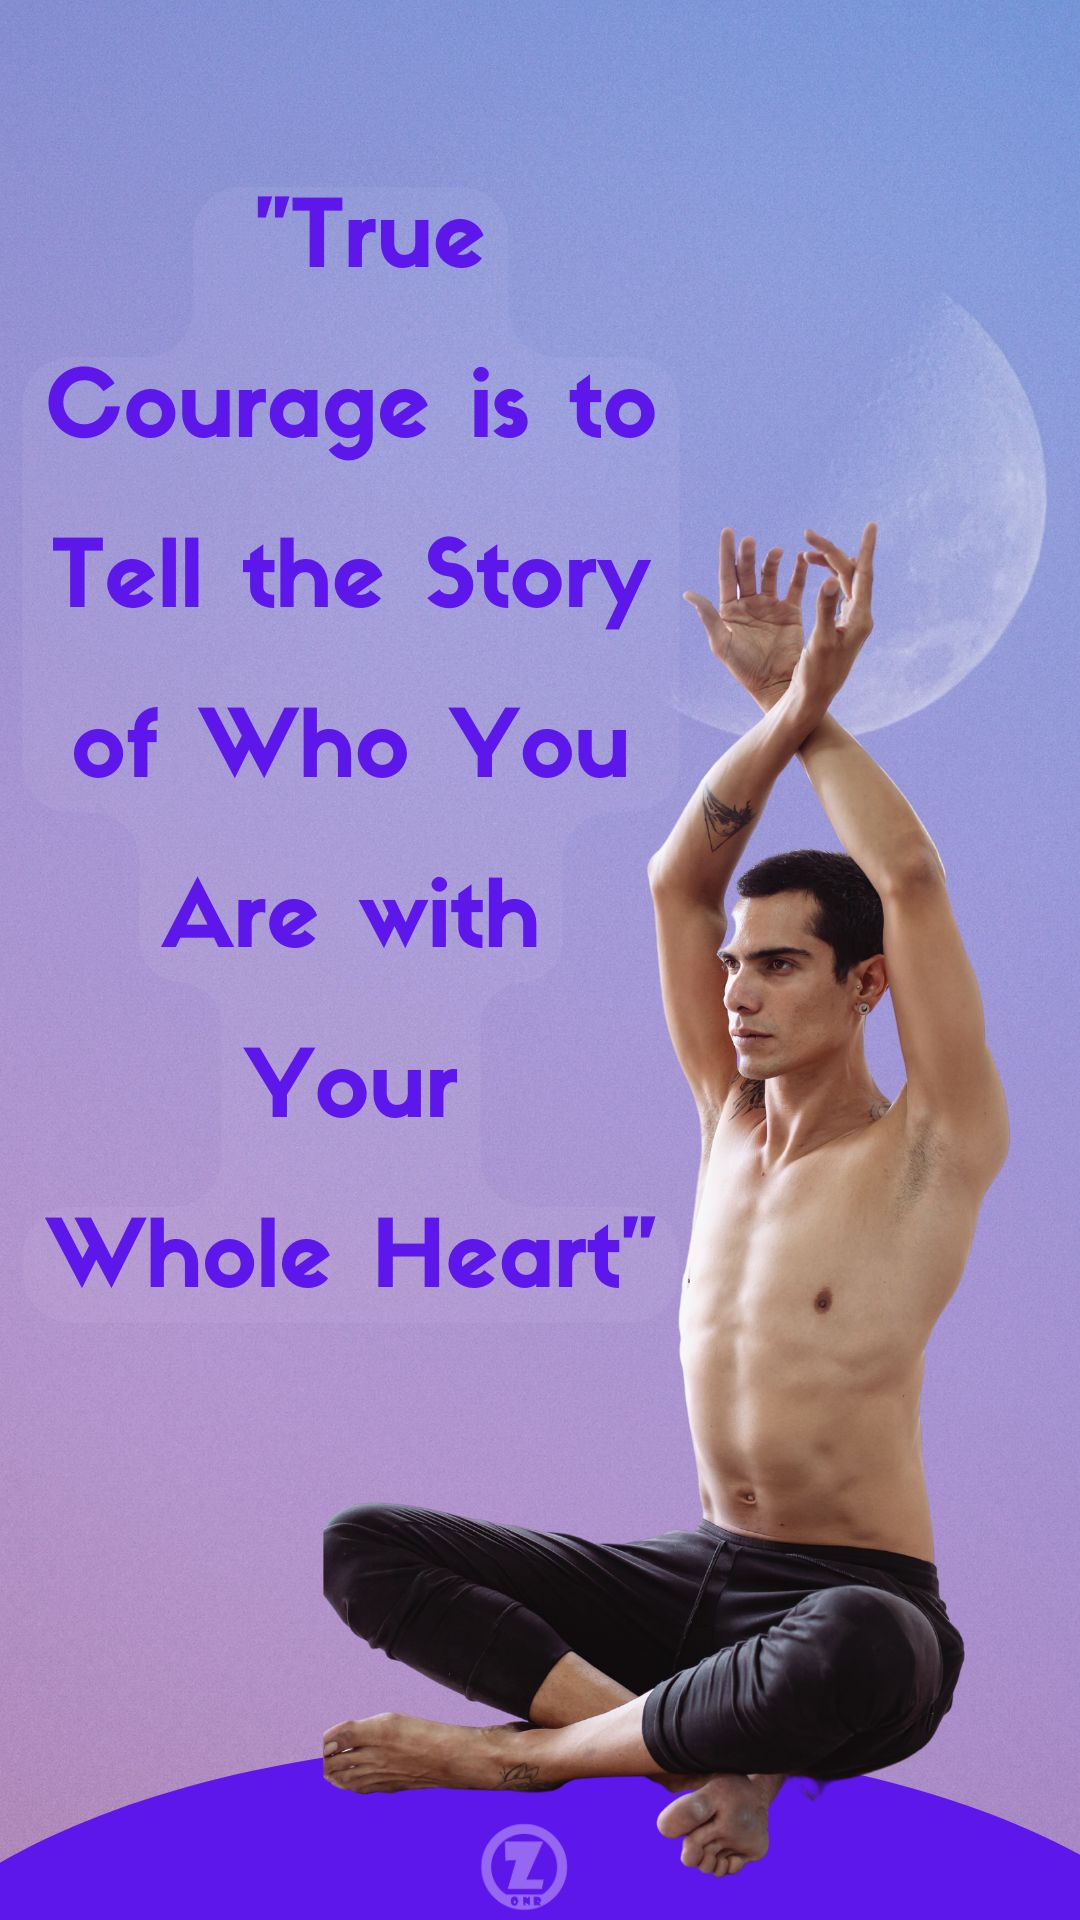 True “Courage is to Tell the Story of Who You Are with Your Whole Heart”* – Step 12